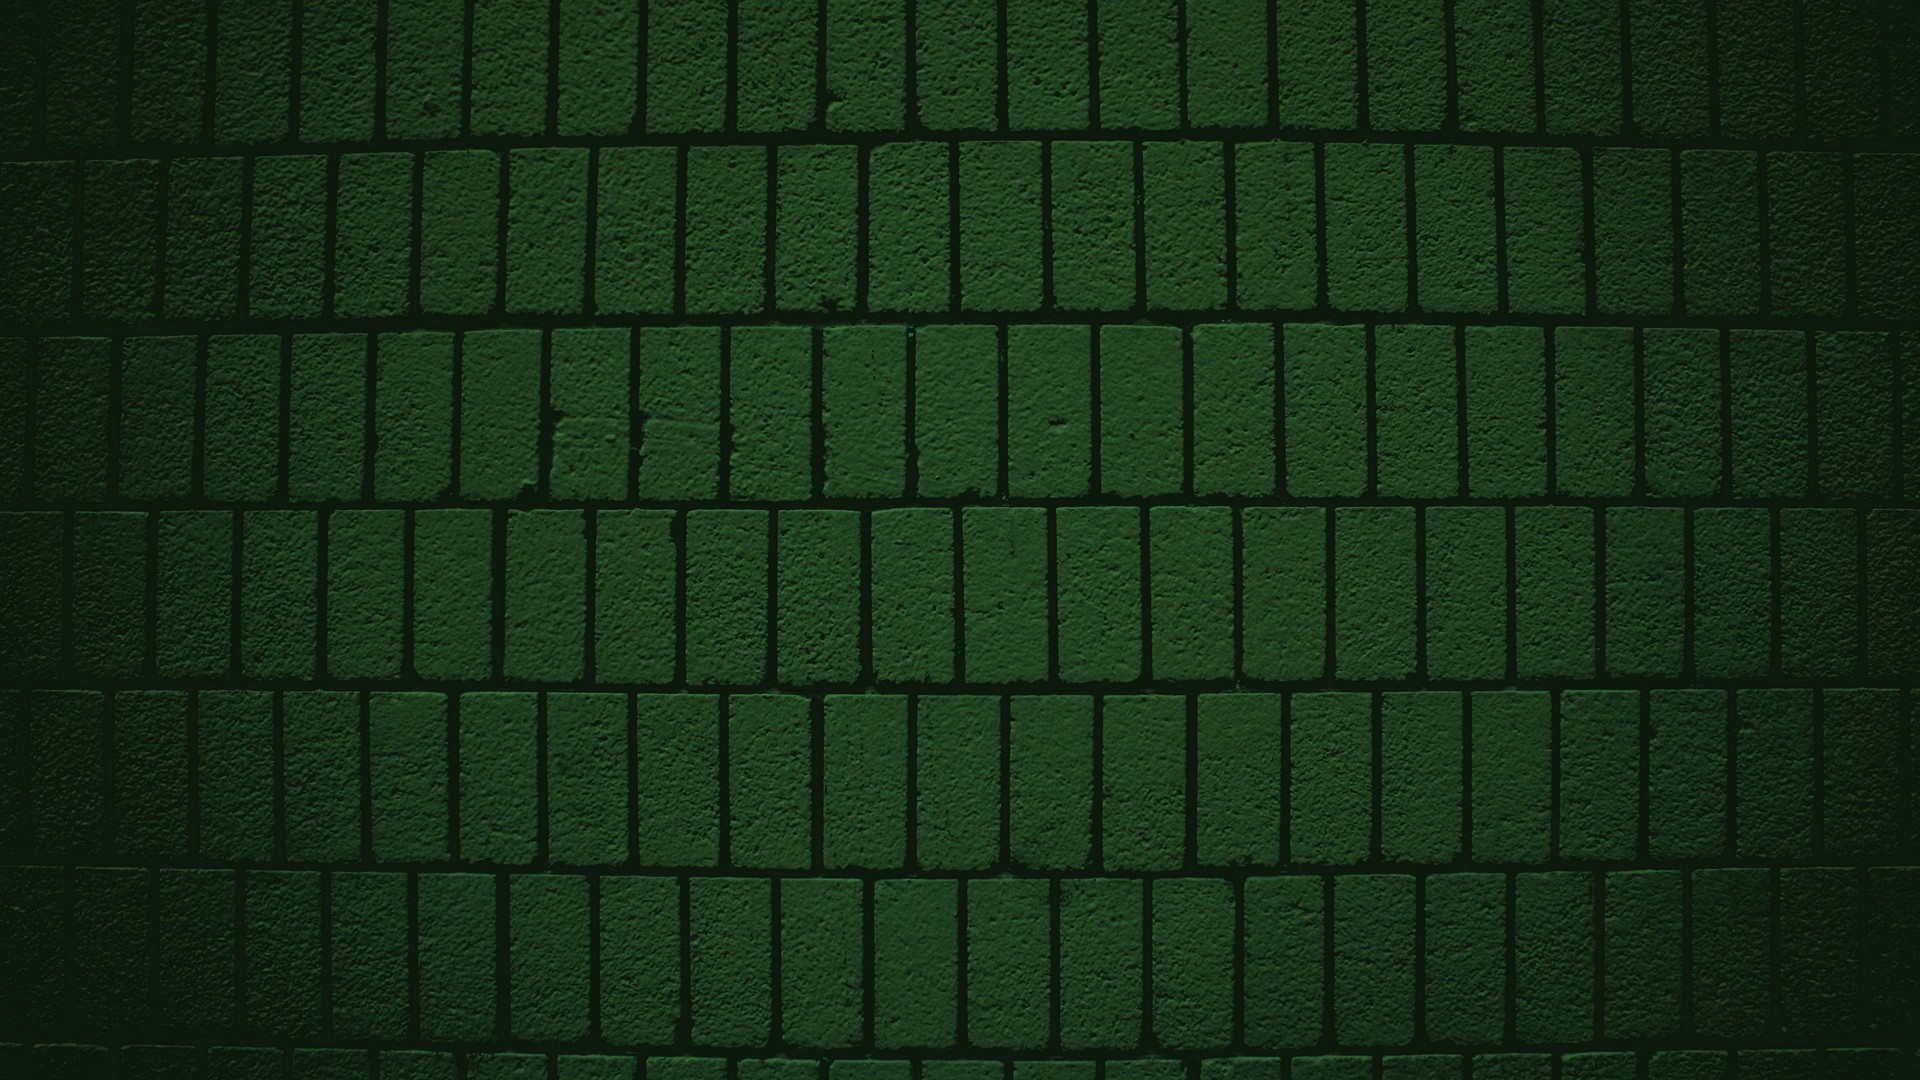 Wallpaper Dark Green Desktop with image resolution 1920x1080 pixel. You can use this wallpaper as background for your desktop Computer Screensavers, Android or iPhone smartphones